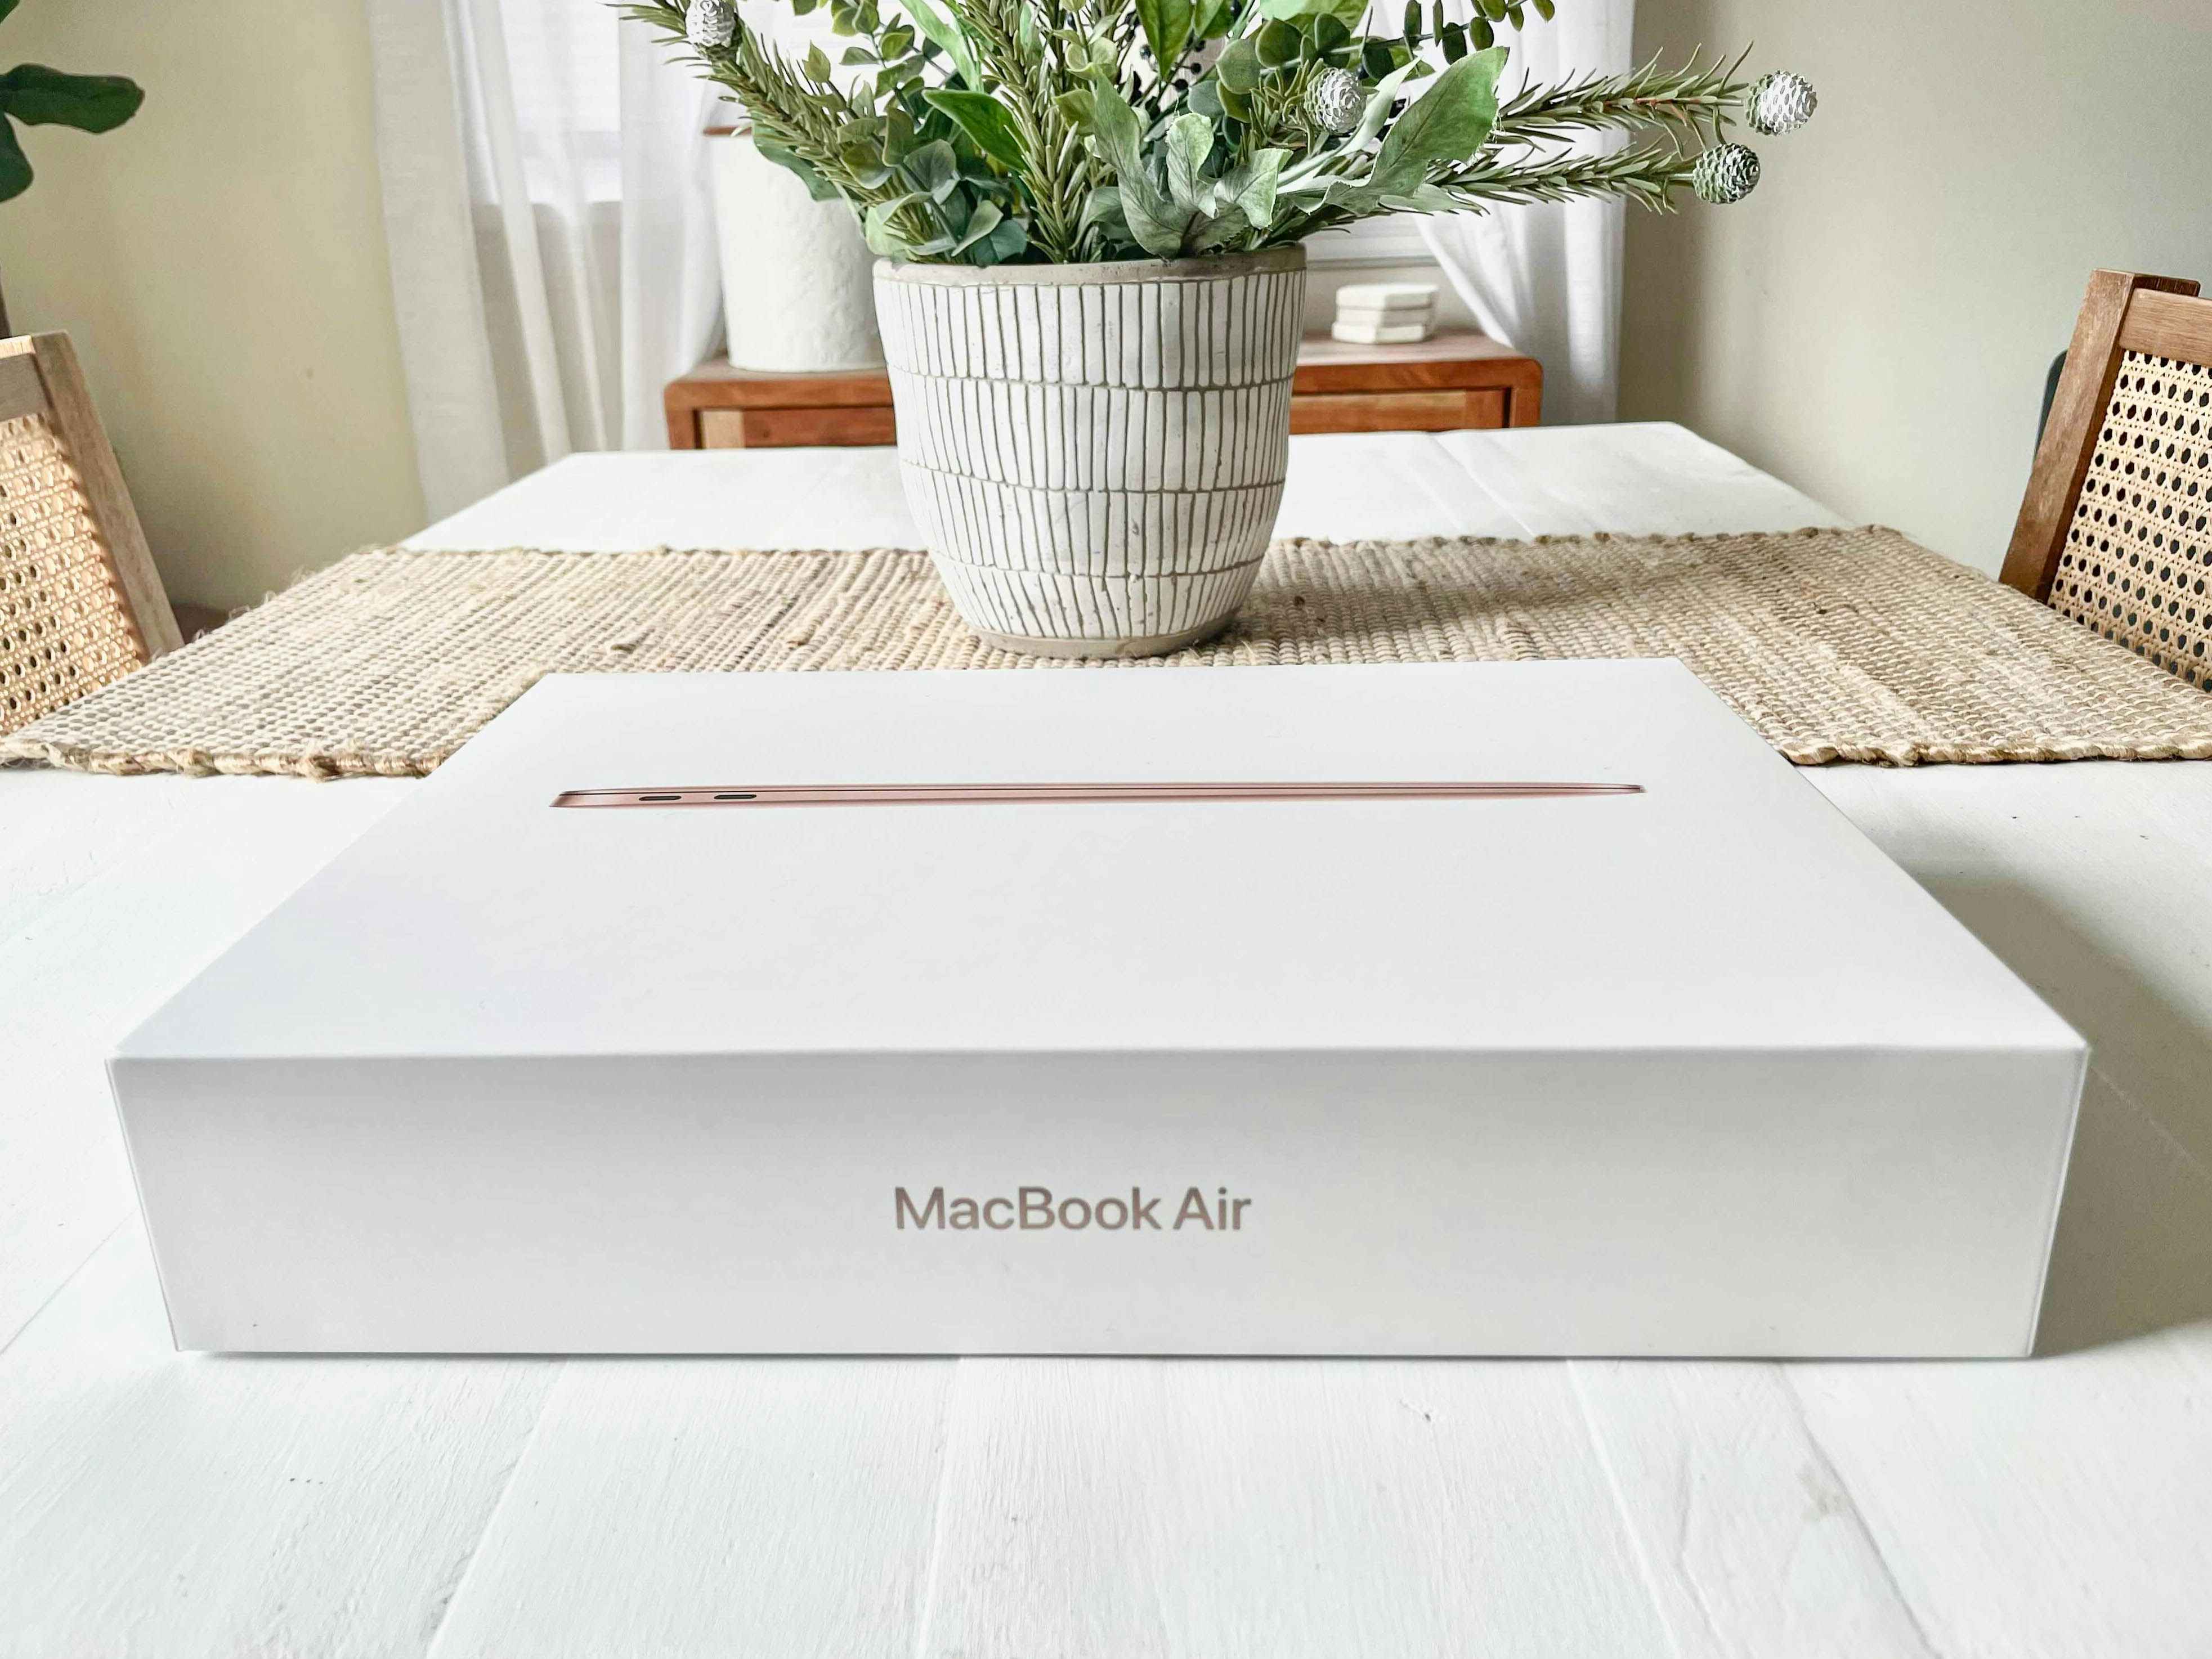 A Macbook box on a table with a plant in the background.